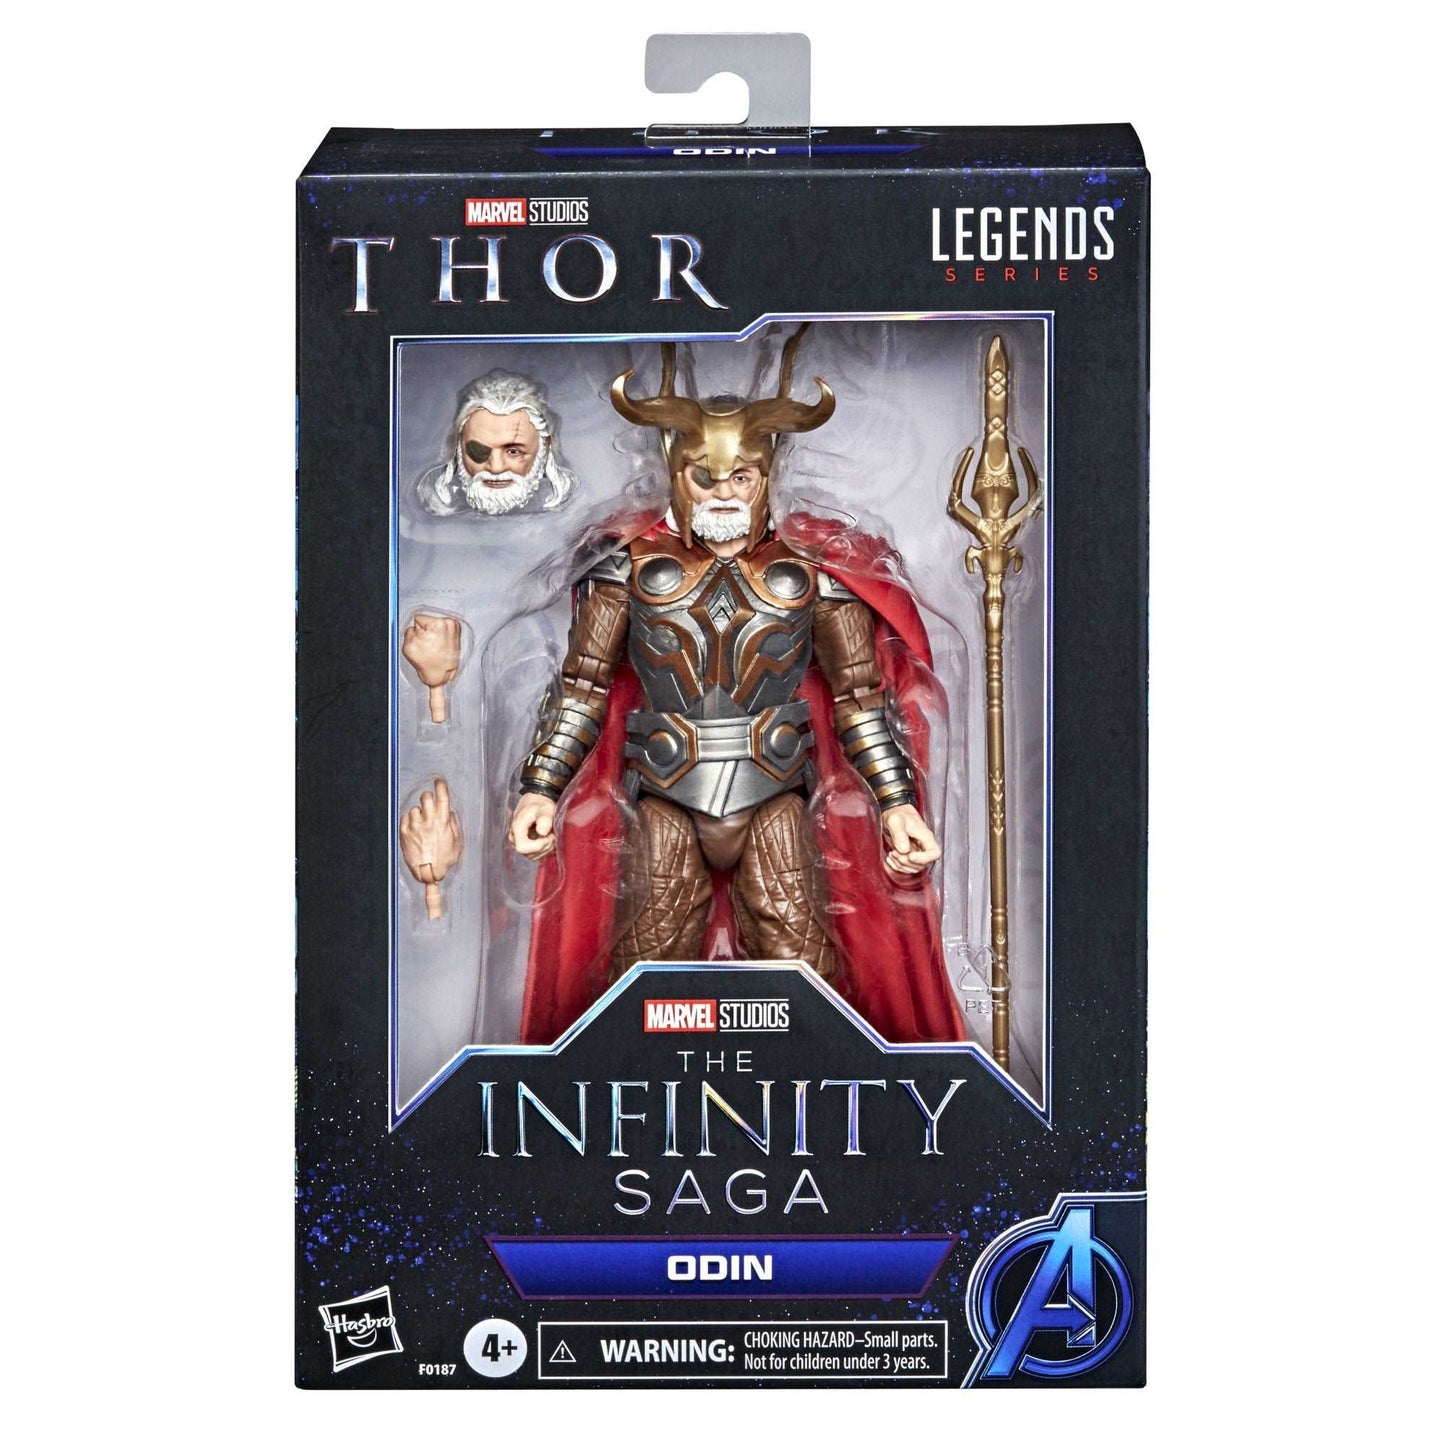 Hasbro Marvel Legends Series Thor Infinity Saga Odin figure in packaging front of box